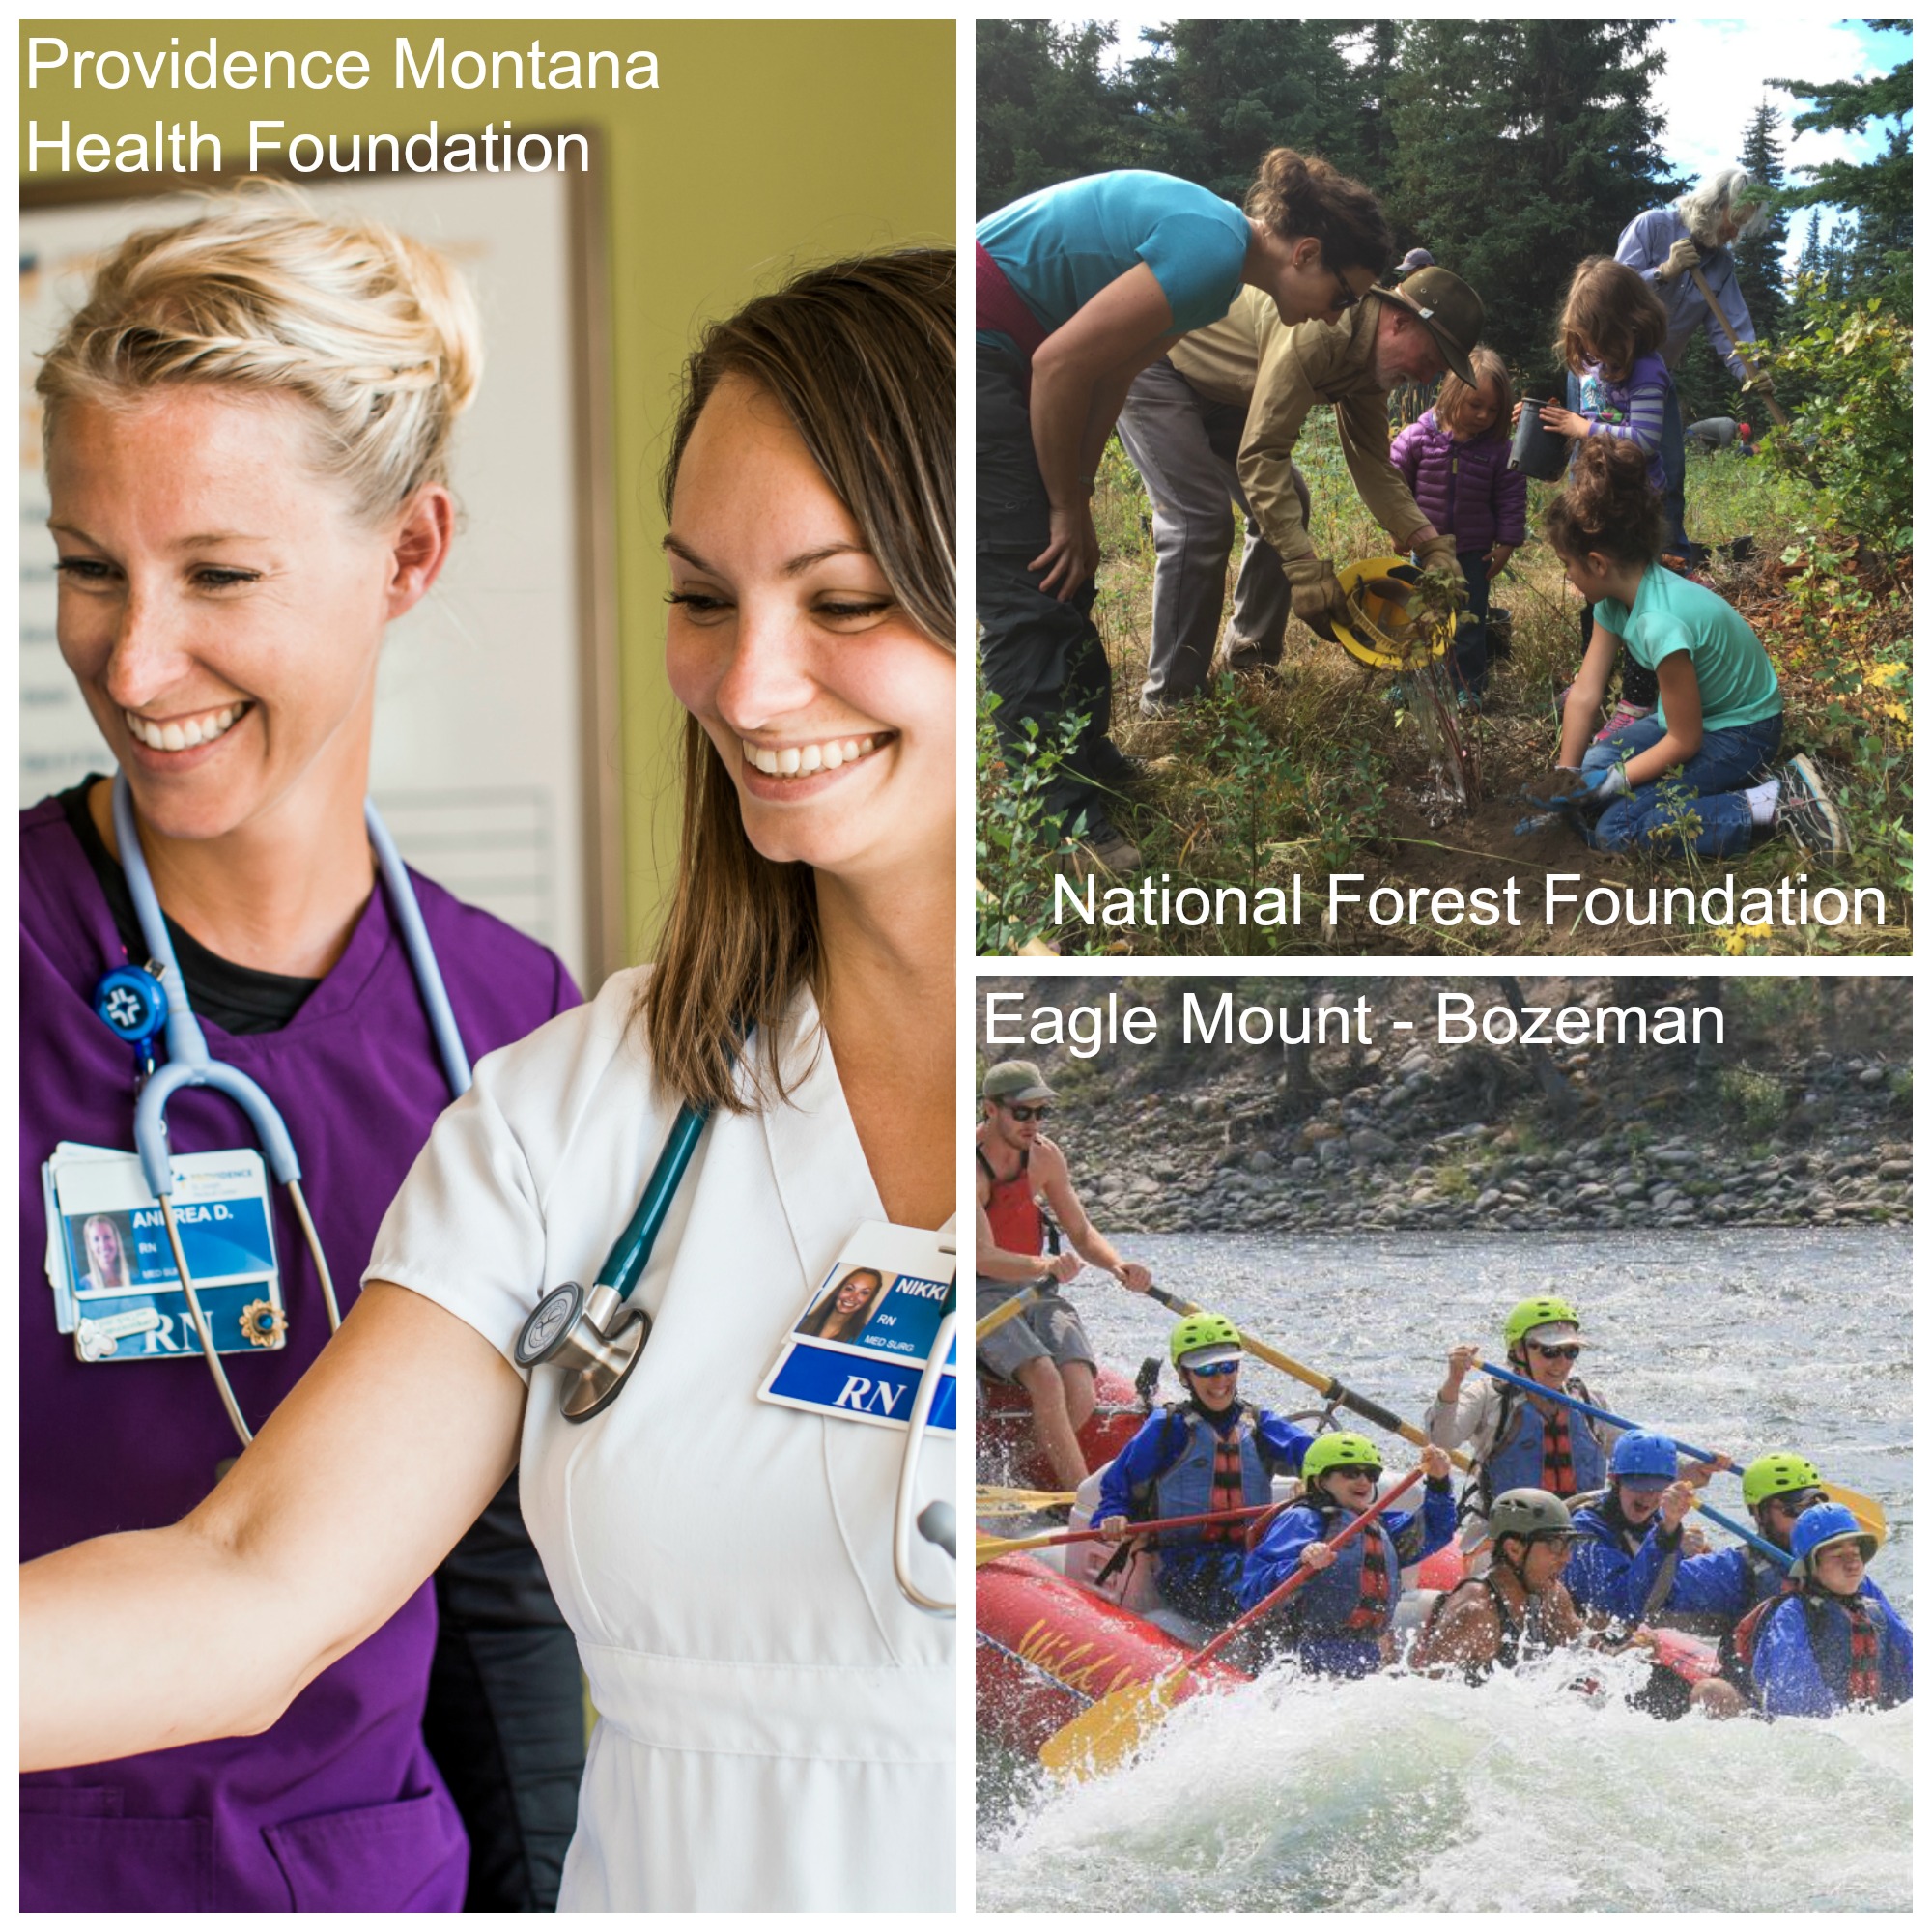 Image 1: A woman with straight blond hair wearing purple scrubs and a woman with straight brown hair wearing white scrubs smile at something off-camera. Text overlay says "Providence Montana Health Foundation." Image 2: a group of adults and children garden together. Text overlay says "National Forest Foundation." Image 3: a group of adults and children wearing blue life vests and helmets on a white water raft. Text overlay says "Eagle Mount - Bozeman." 